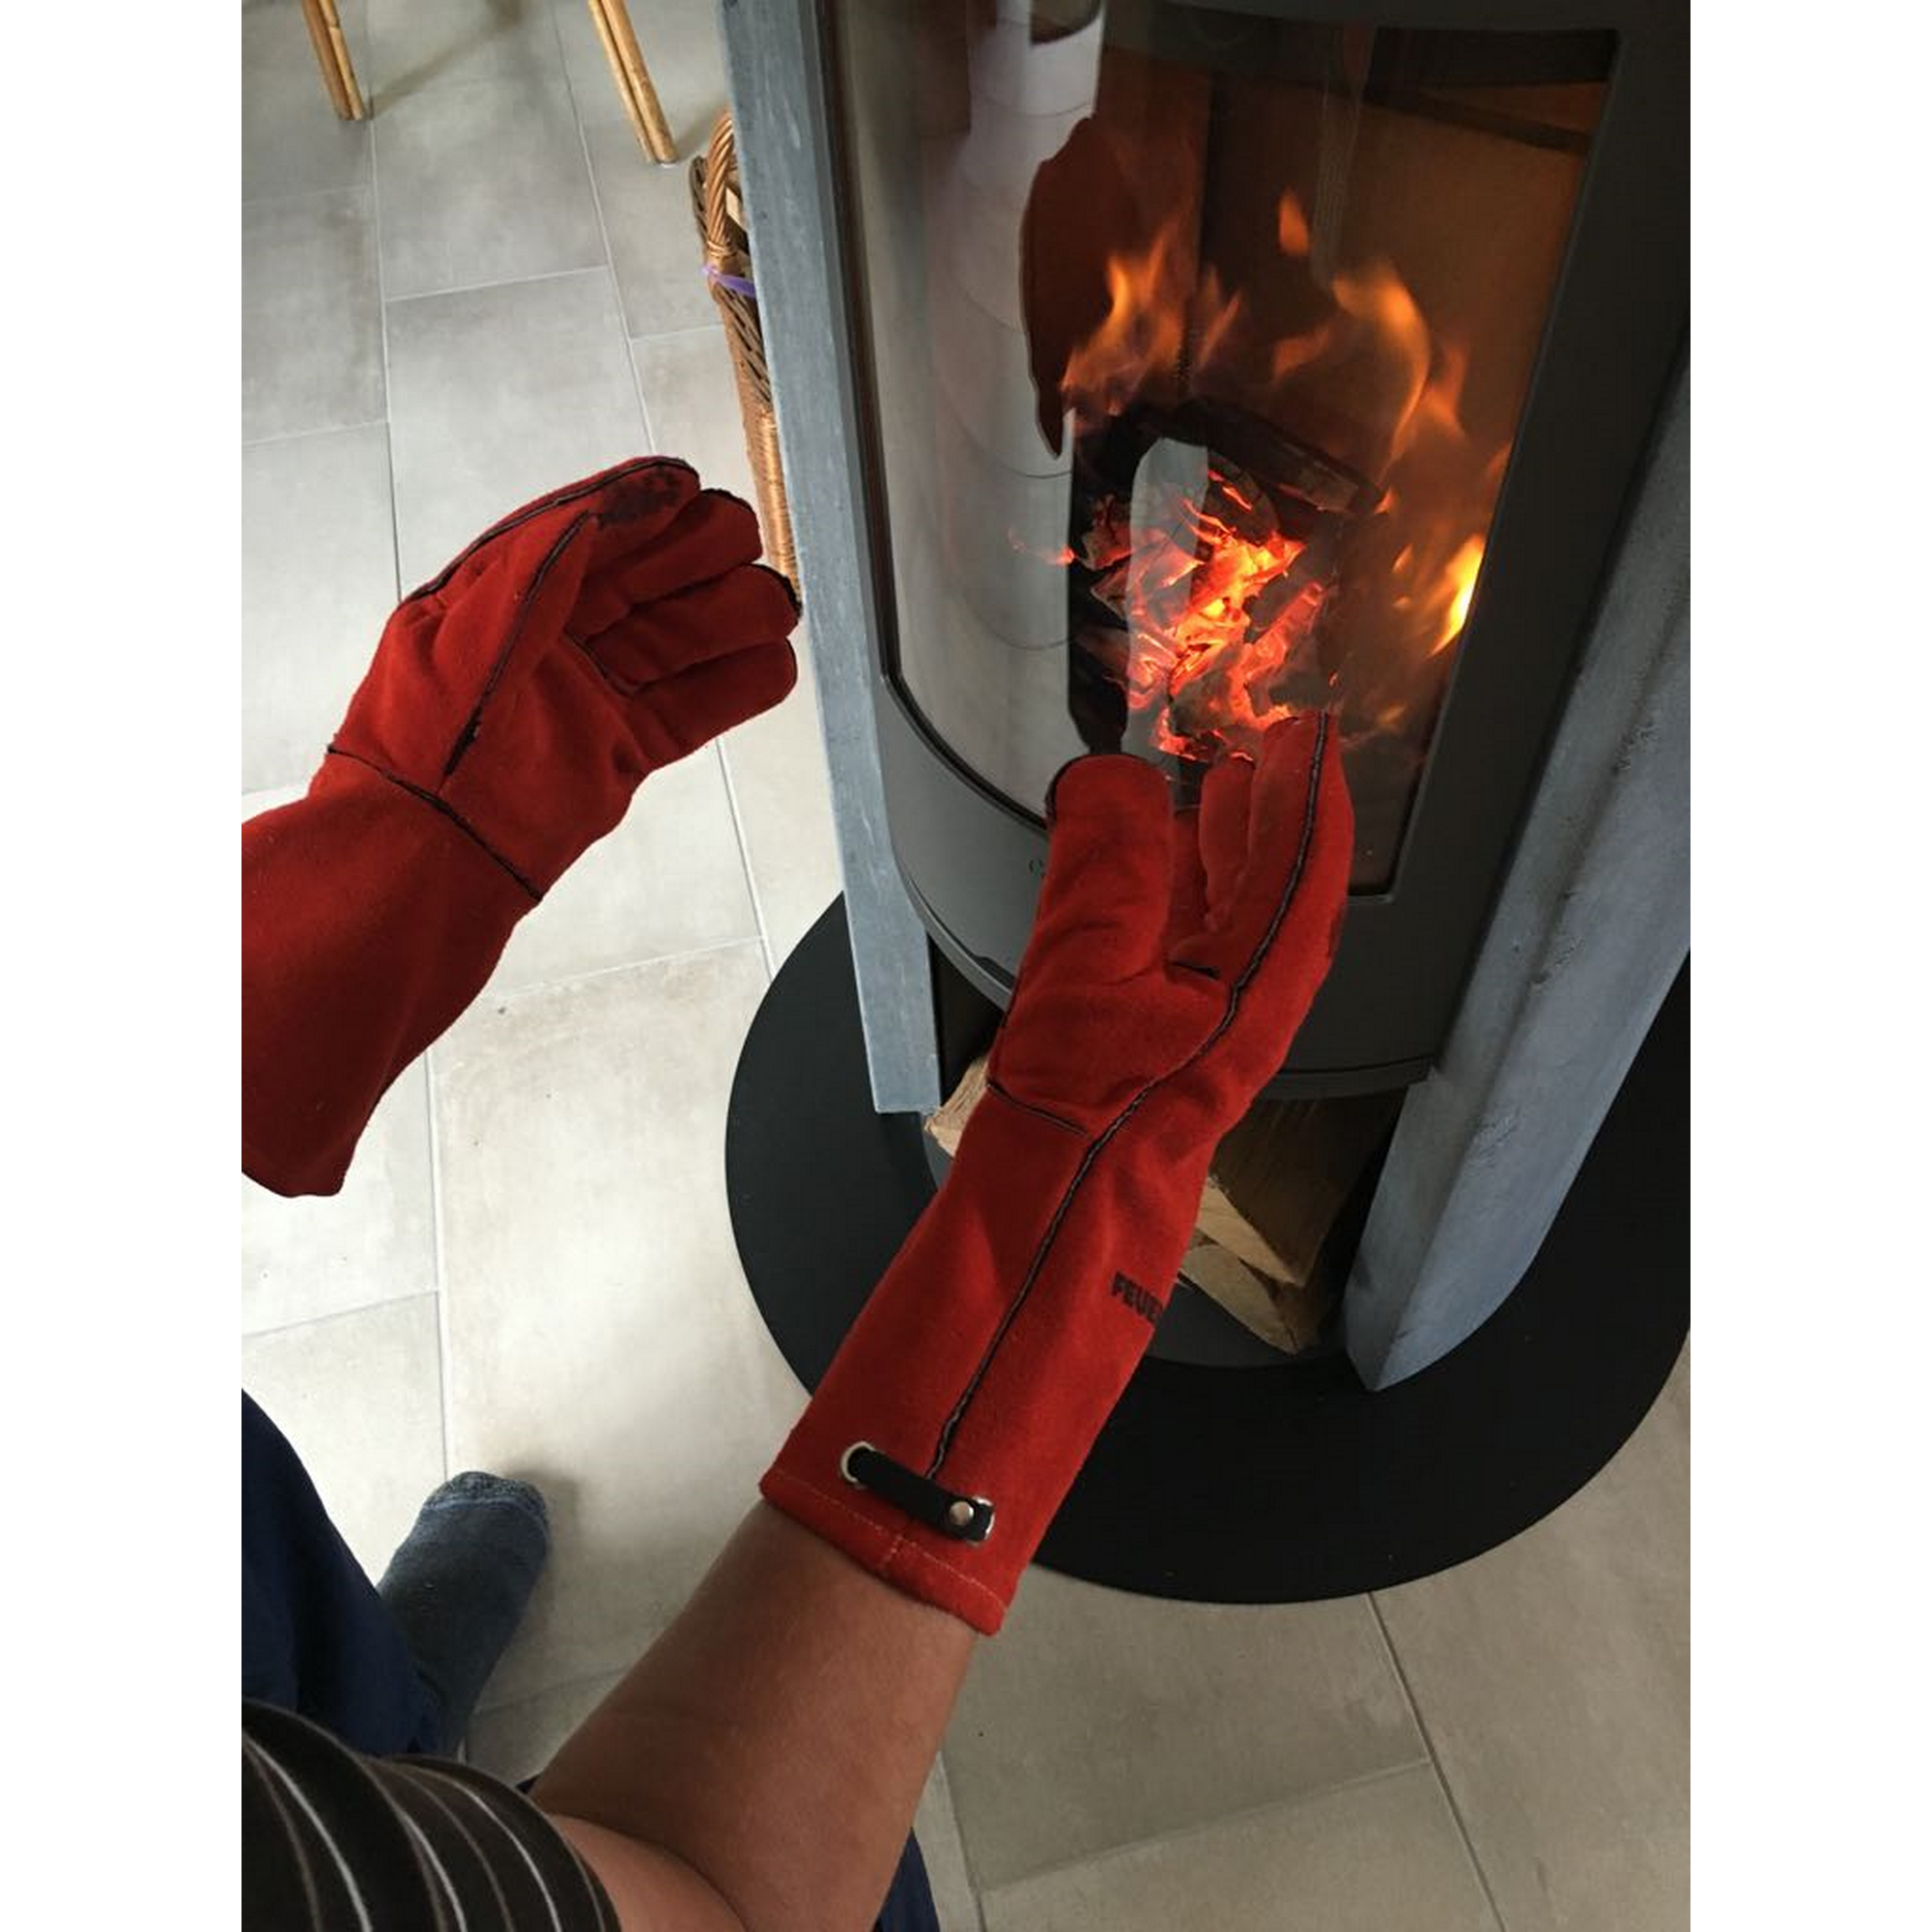 Grillhandschuhe 'From Hell!' Leder rot Größe 8 + product picture